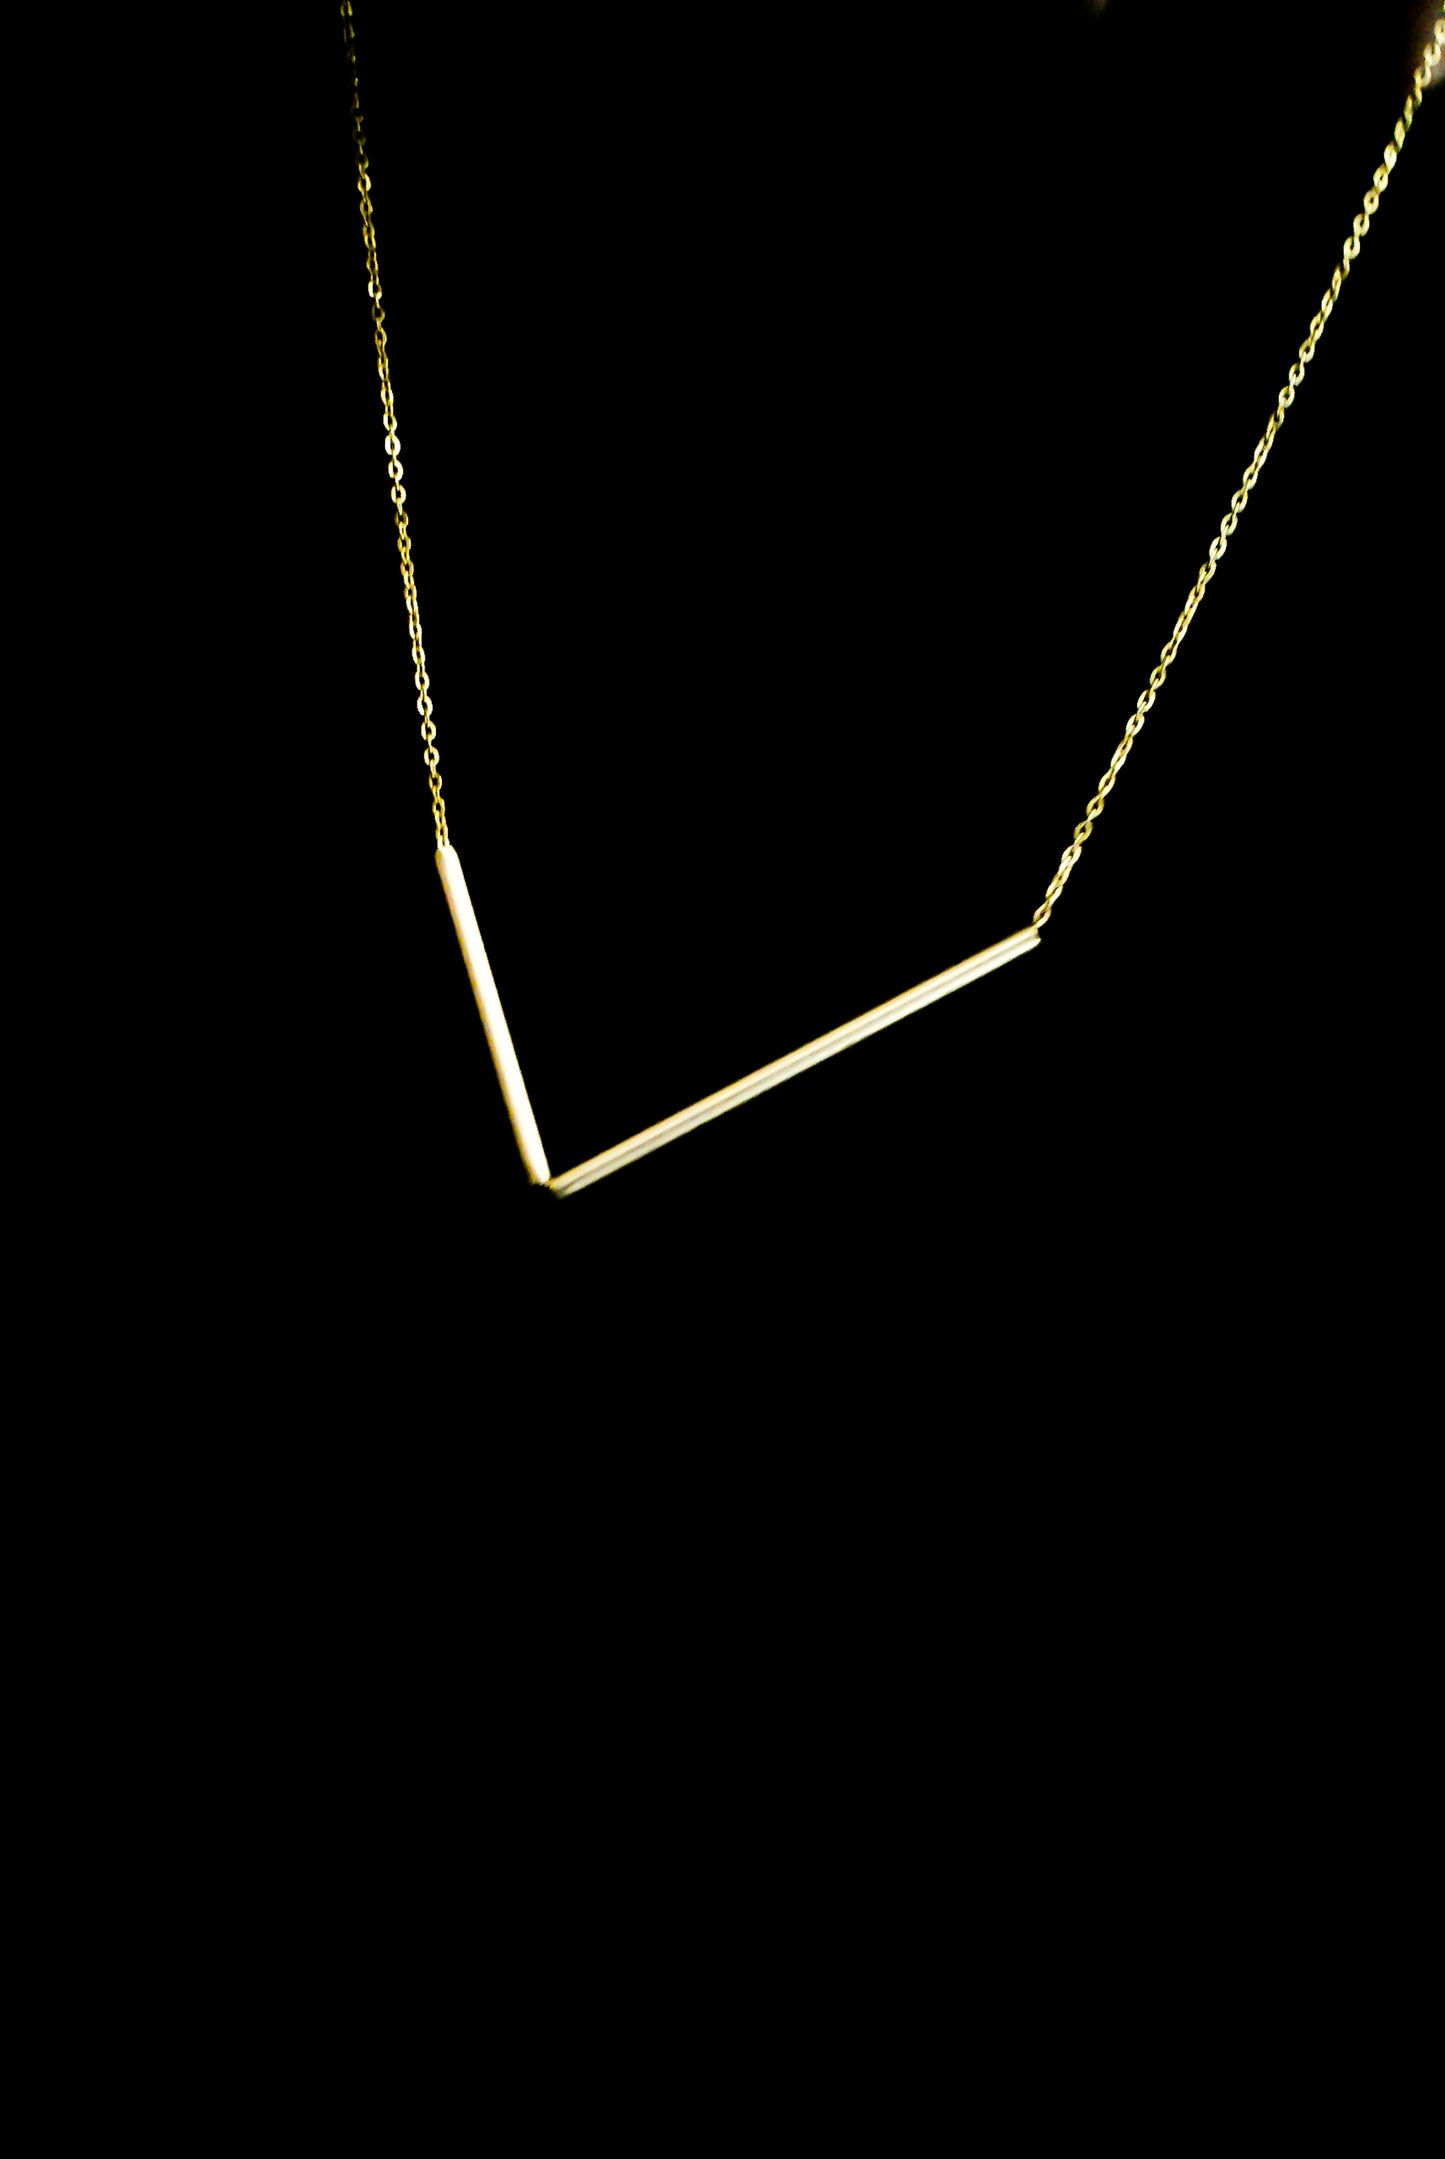 Mini Geo Necklace, Gold Fill, Rose Gold Fill or Sterling Silver